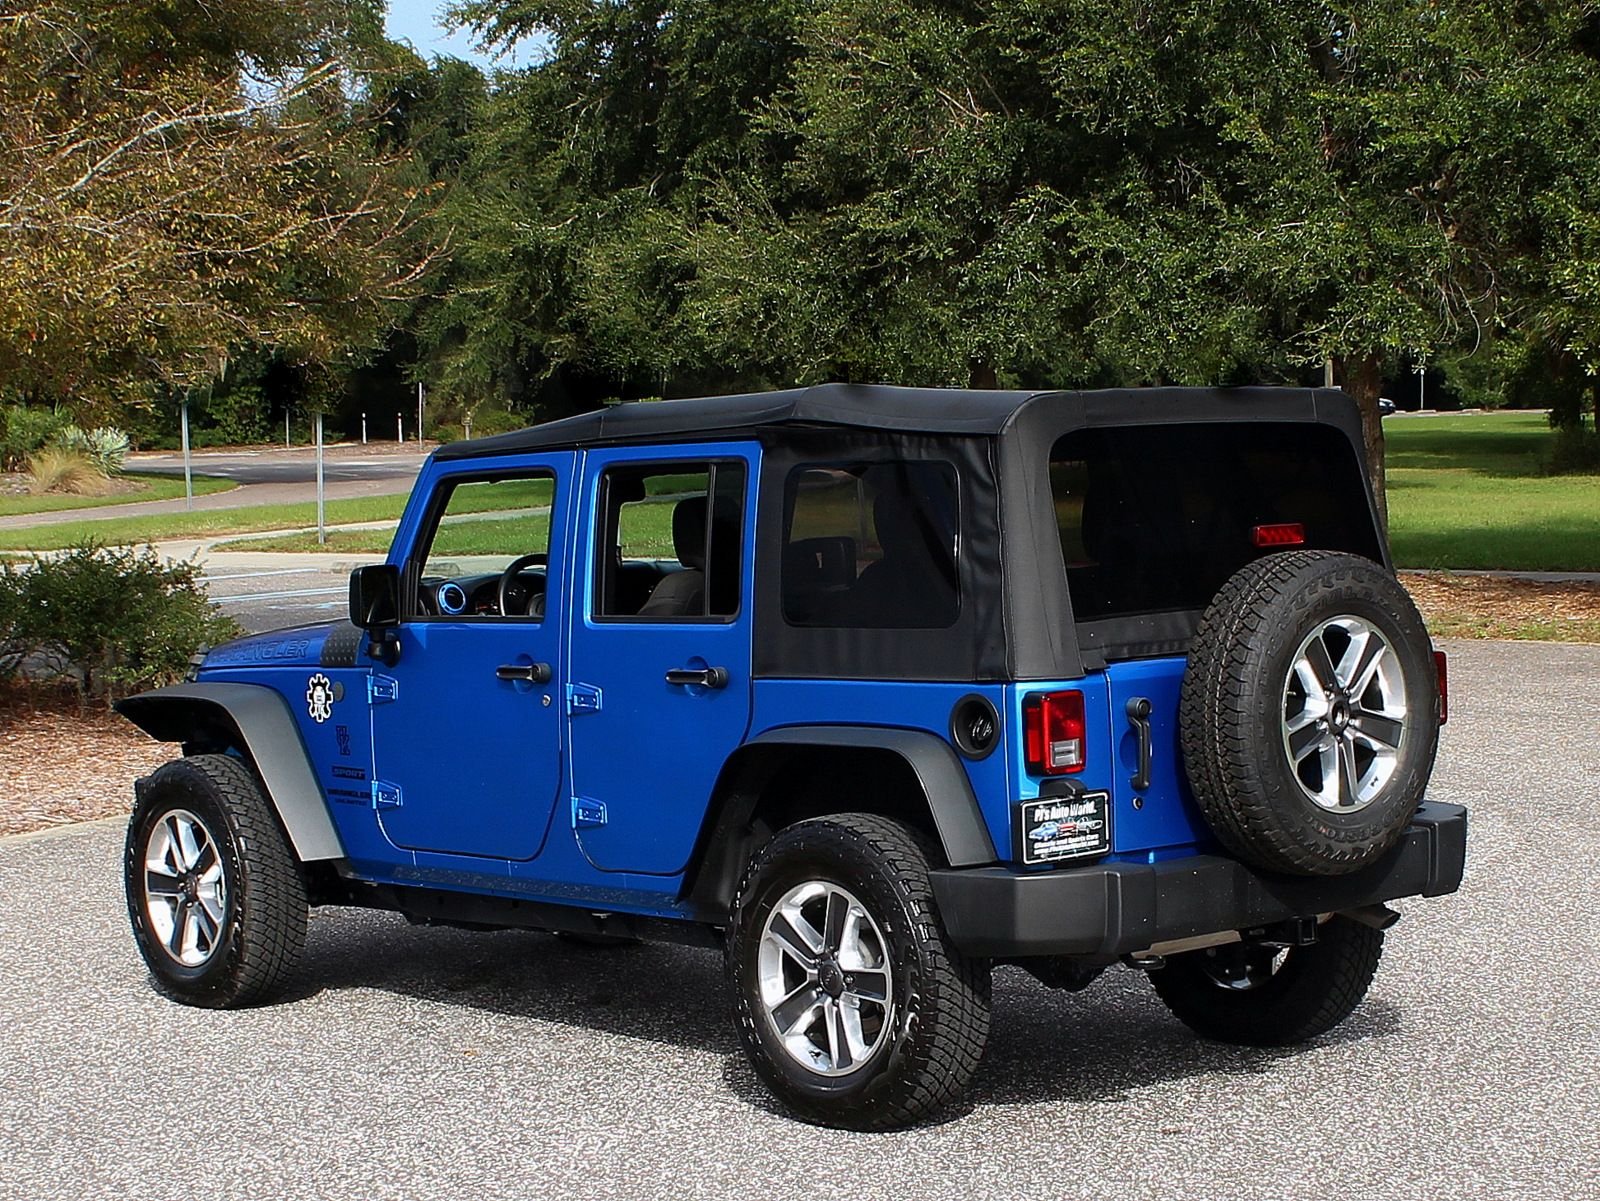 2016 Jeep Wrangler Unlimited | PJ's Auto World Classic Cars for Sale